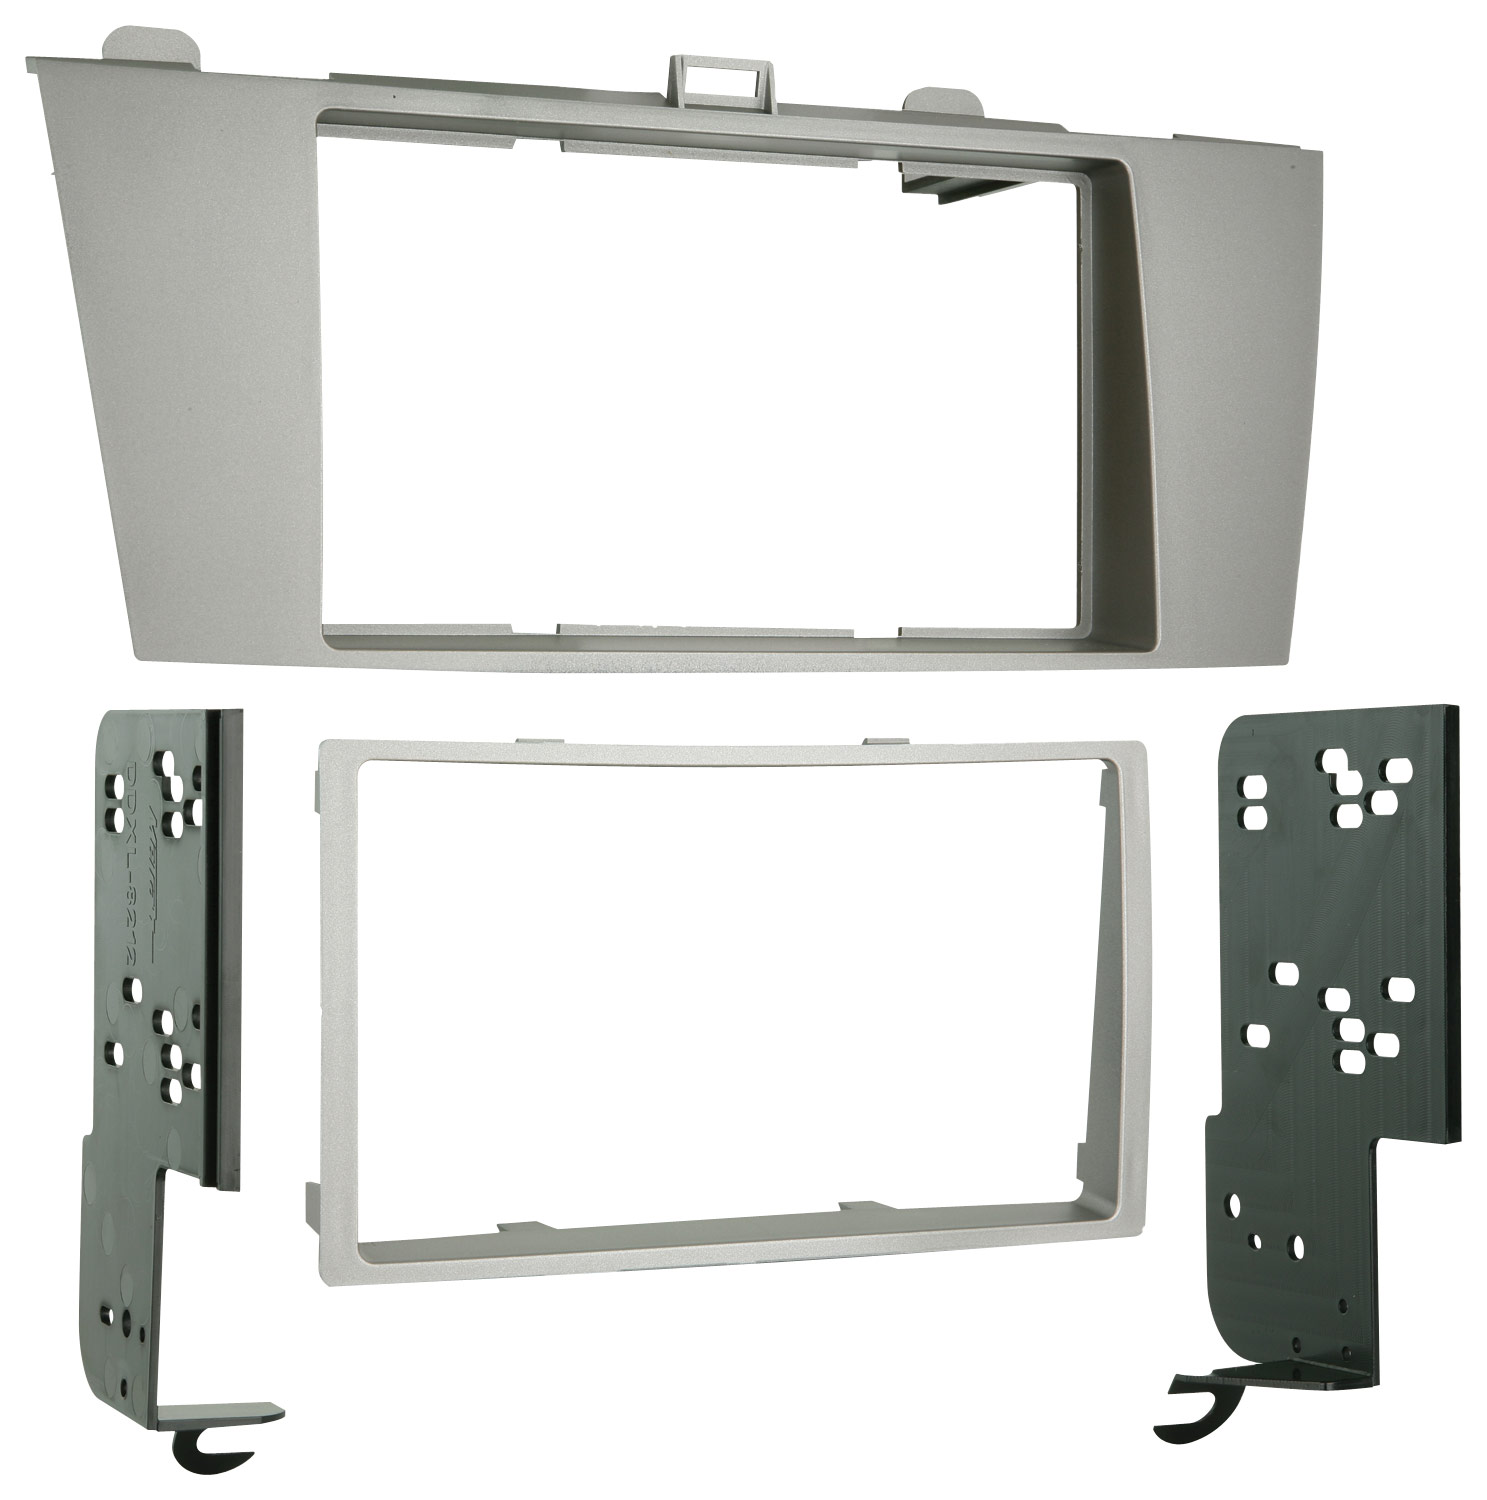 Metra - Installation Kit for 2004-2008 Toyota Solara Vehicles - Silver was $49.99 now $37.49 (25.0% off)